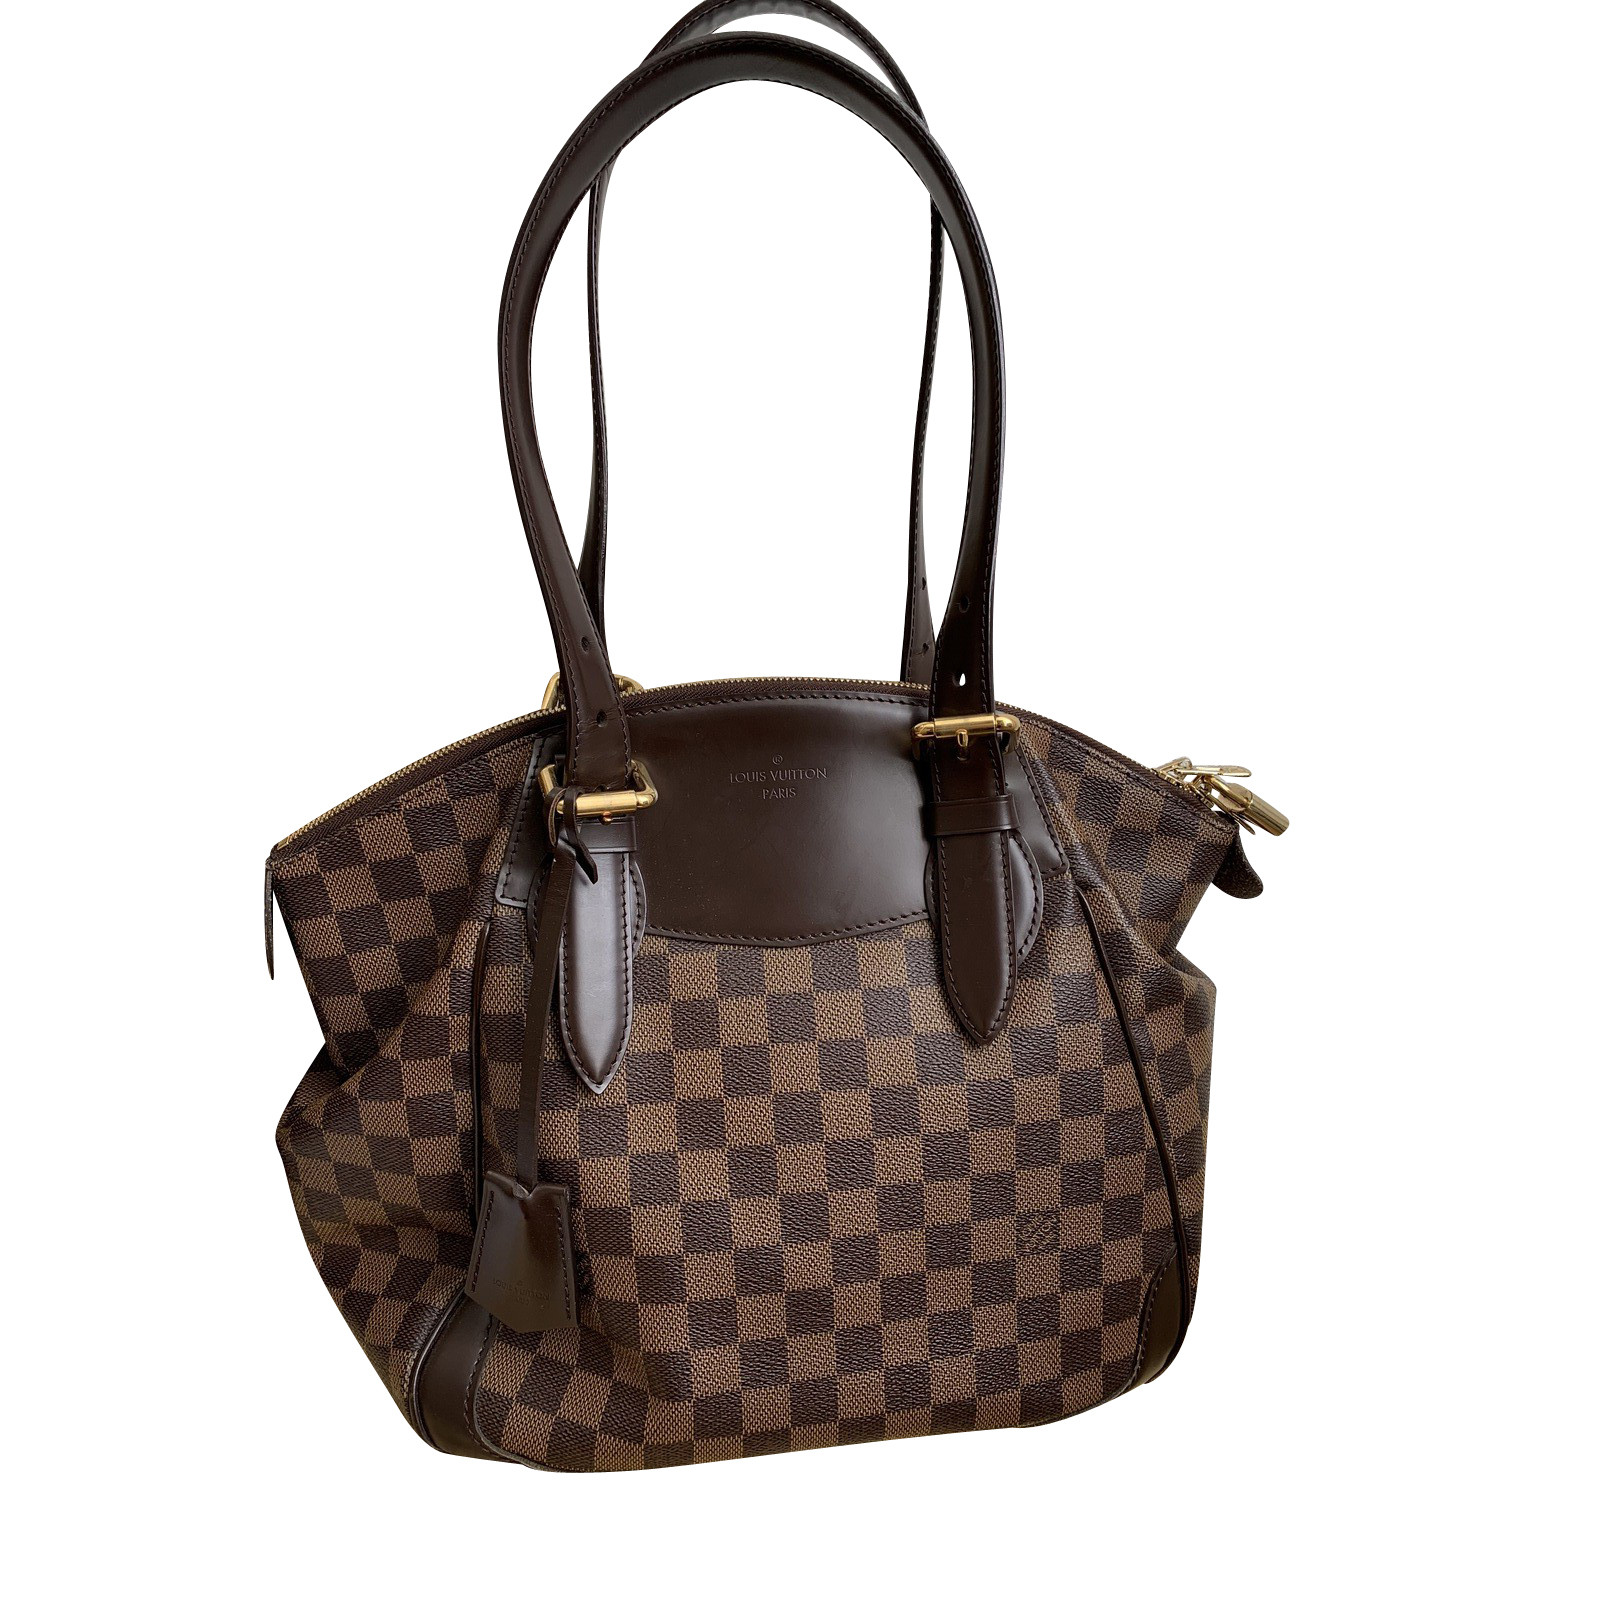 Louis Vuitton Verona Mm30 Canvas In Brown Second Hand Louis Vuitton Verona Mm30 Canvas In Brown Buy Used For 1075